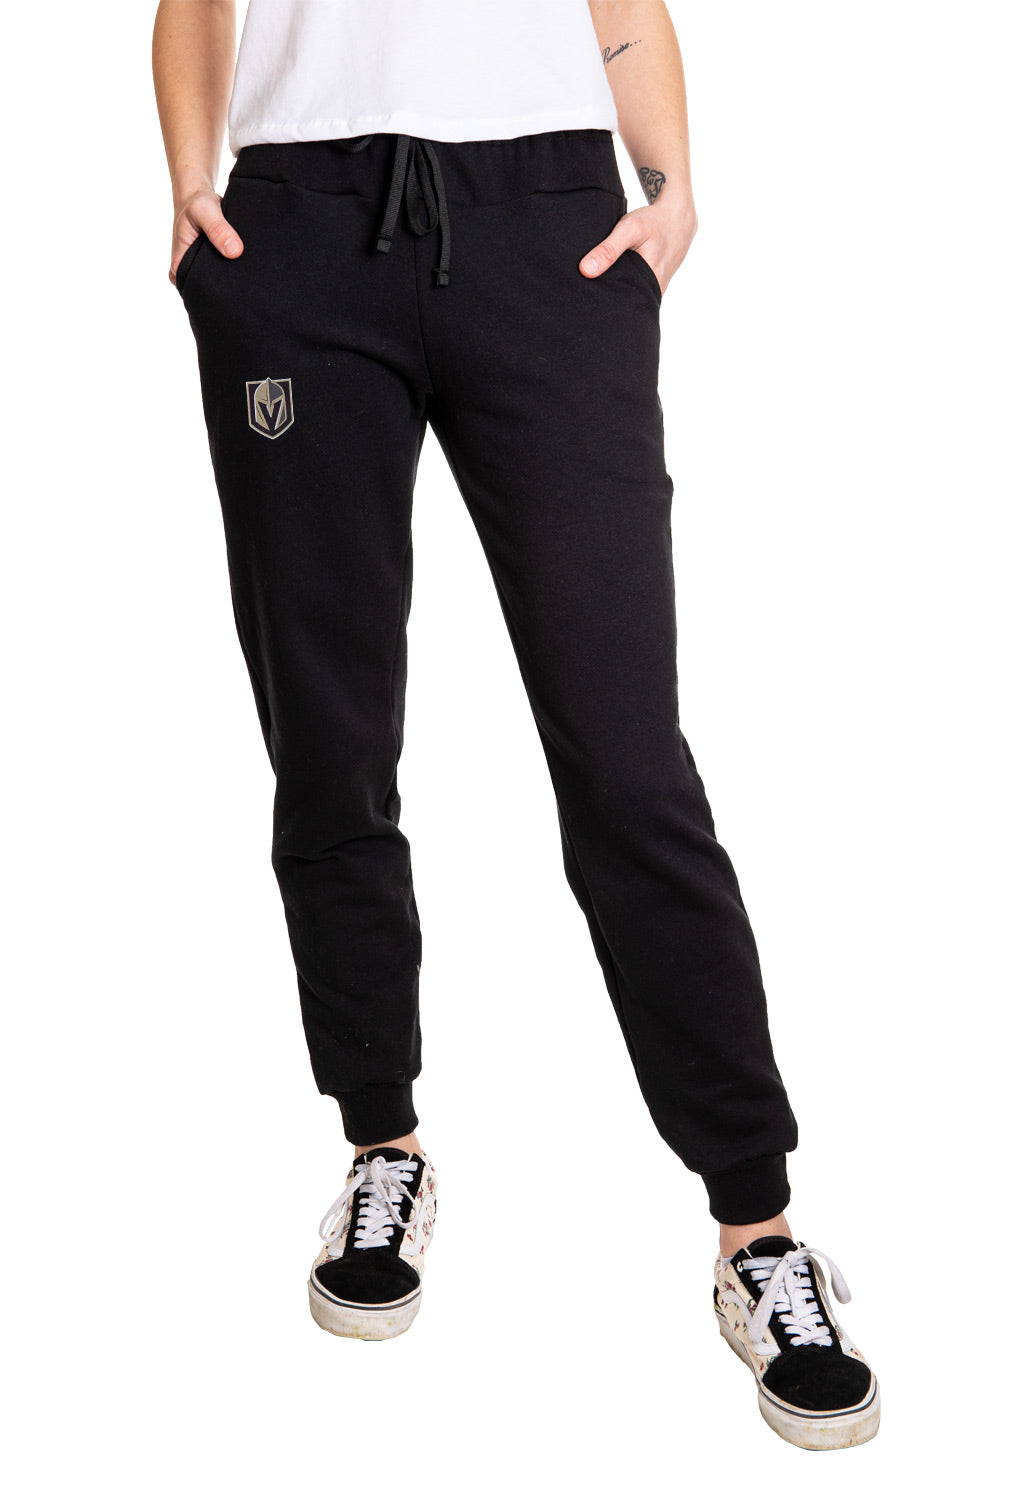 Vegas Golden Knights Ladies Cuffed Jogger Style Track Pants